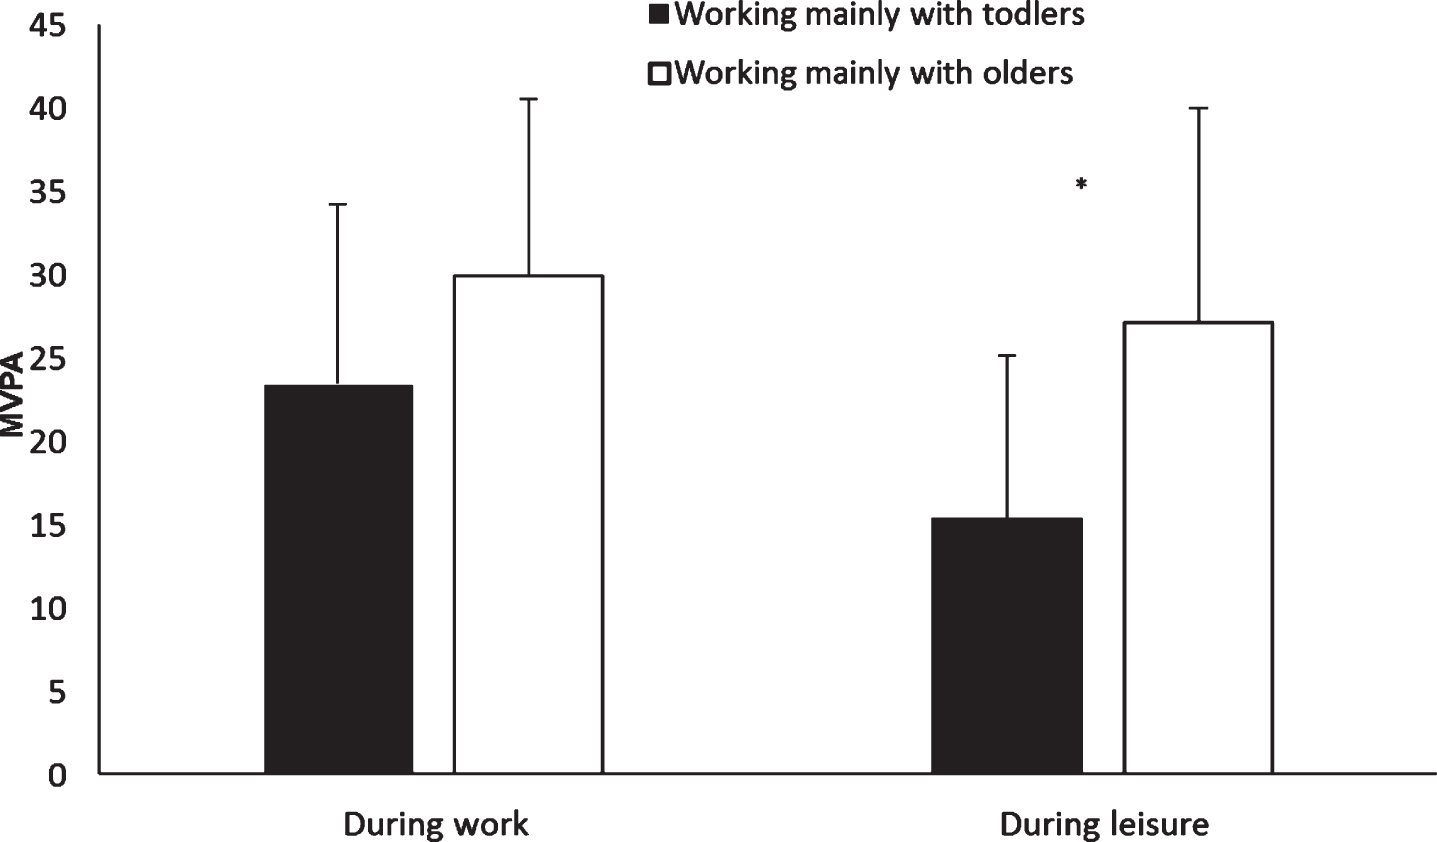 Mean minutes of daily MVPA during working hours and leisure time among staff working mostly with toddlers and staff working mostly with older children. *Difference in the mean number of minutes of MVPA during leisure between staff working with toddlers and staff working with older children.